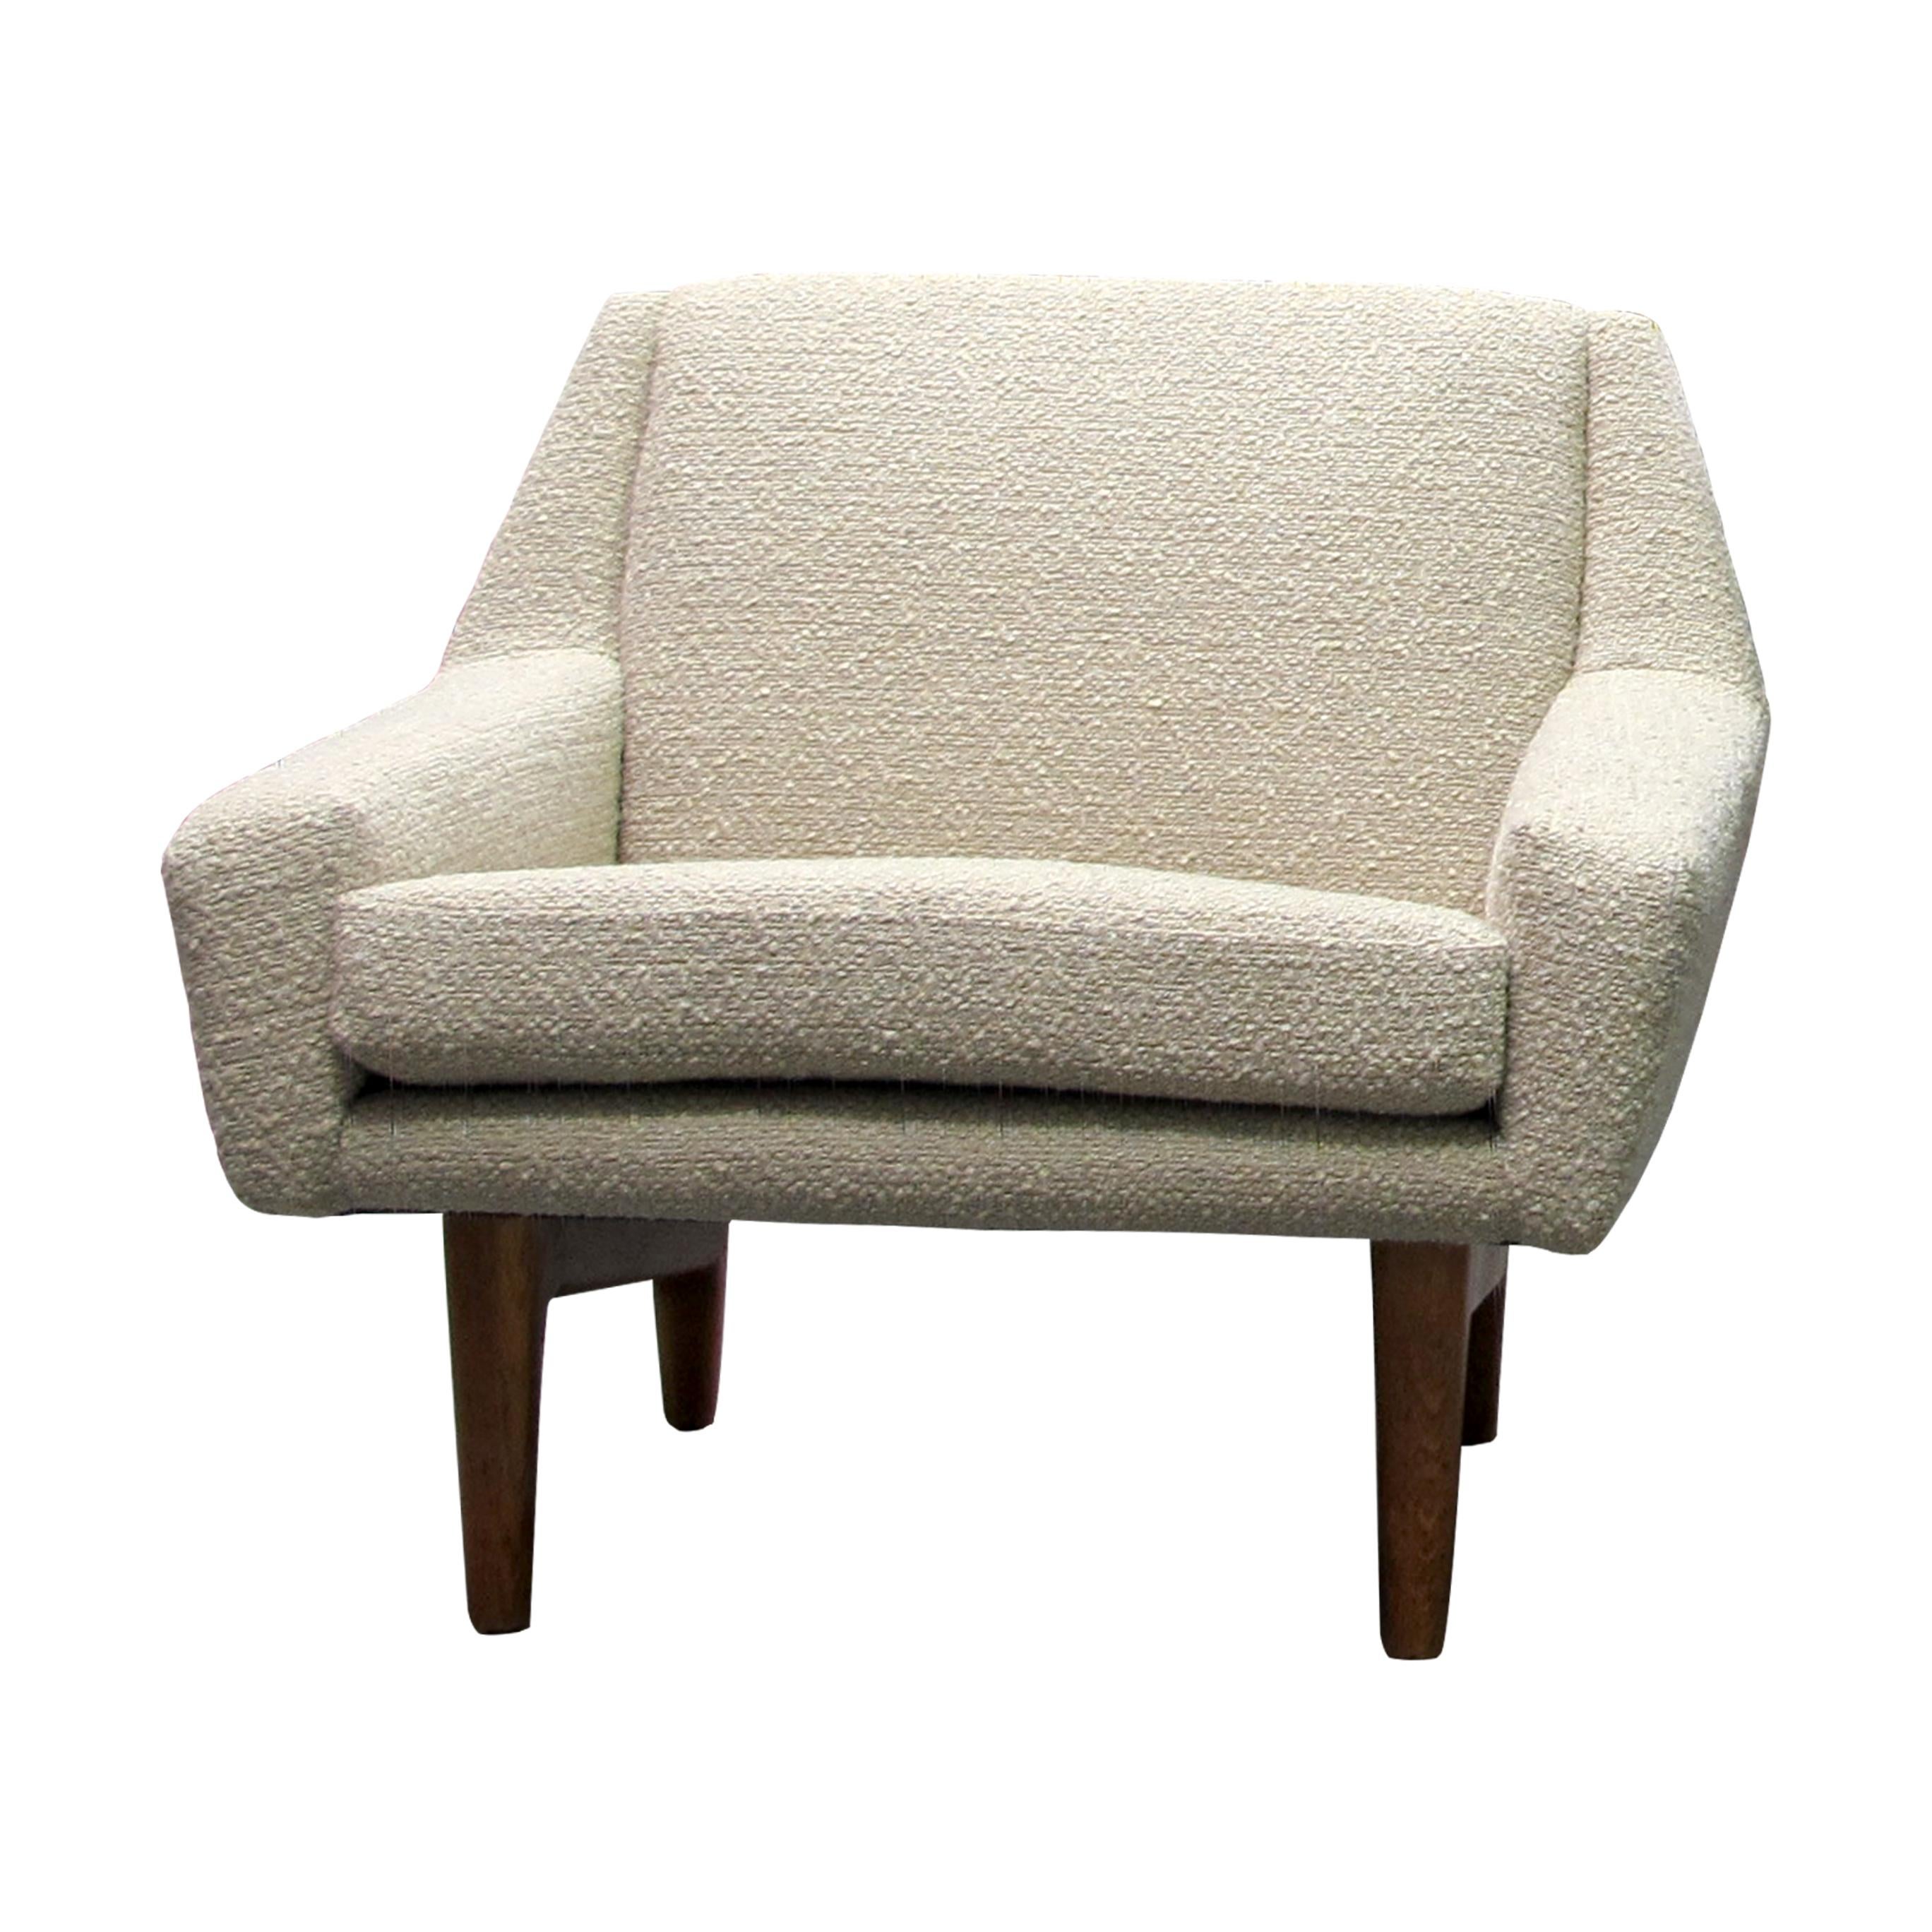 This elegant and comfortable pair of armchairs, mid-century Swedish, is newly upholstered in a boucle fabric. The armchairs boast beautiful ergonomic contours and are presented on a sturdy walnut wooden frame. 

Size: H75 cm x W90 cm x D80 cm 
Seat